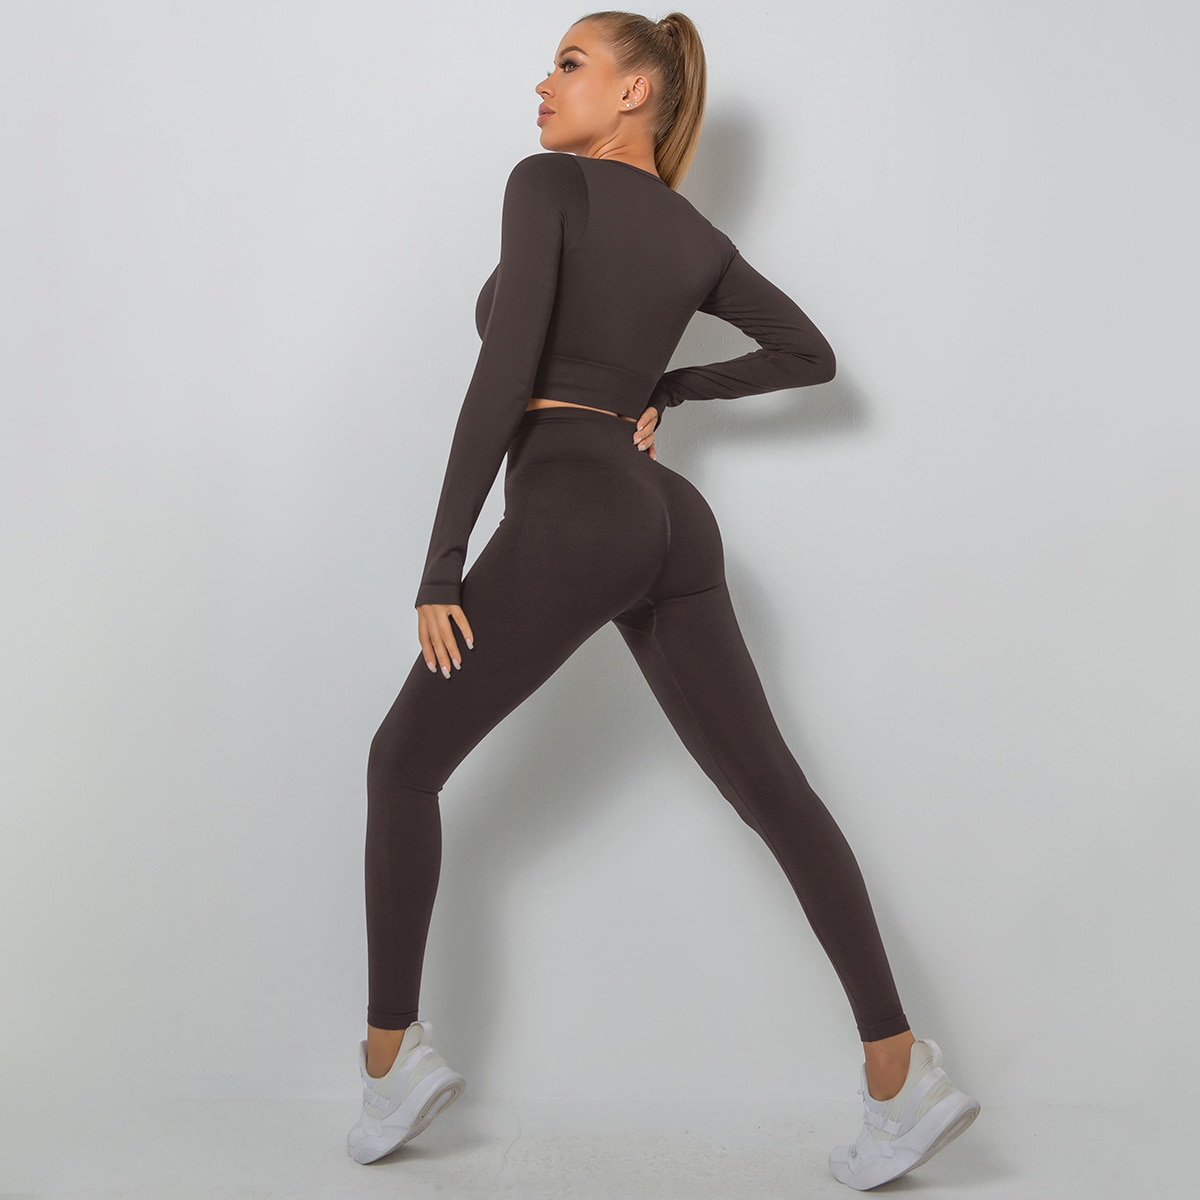 Yoga-Set-2PCS-Sportswear-Women-Suit-For-Fitness-Seamless-Sports-Suit-Workout-Clothes-Tracksuit-Sports-Outfit-4